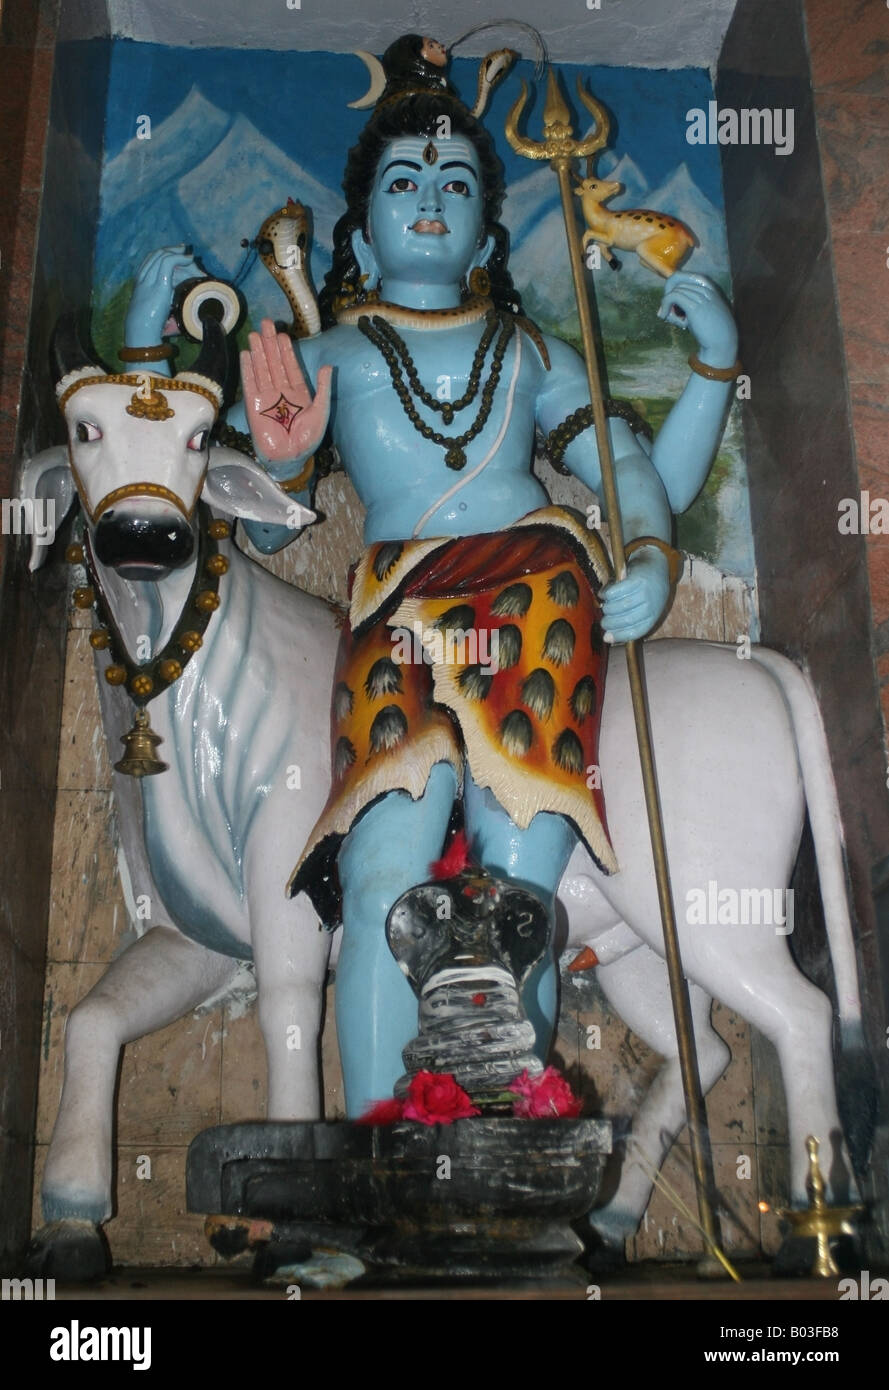 Statue of the Hindu god Shiva at a temple in India Stock Photo